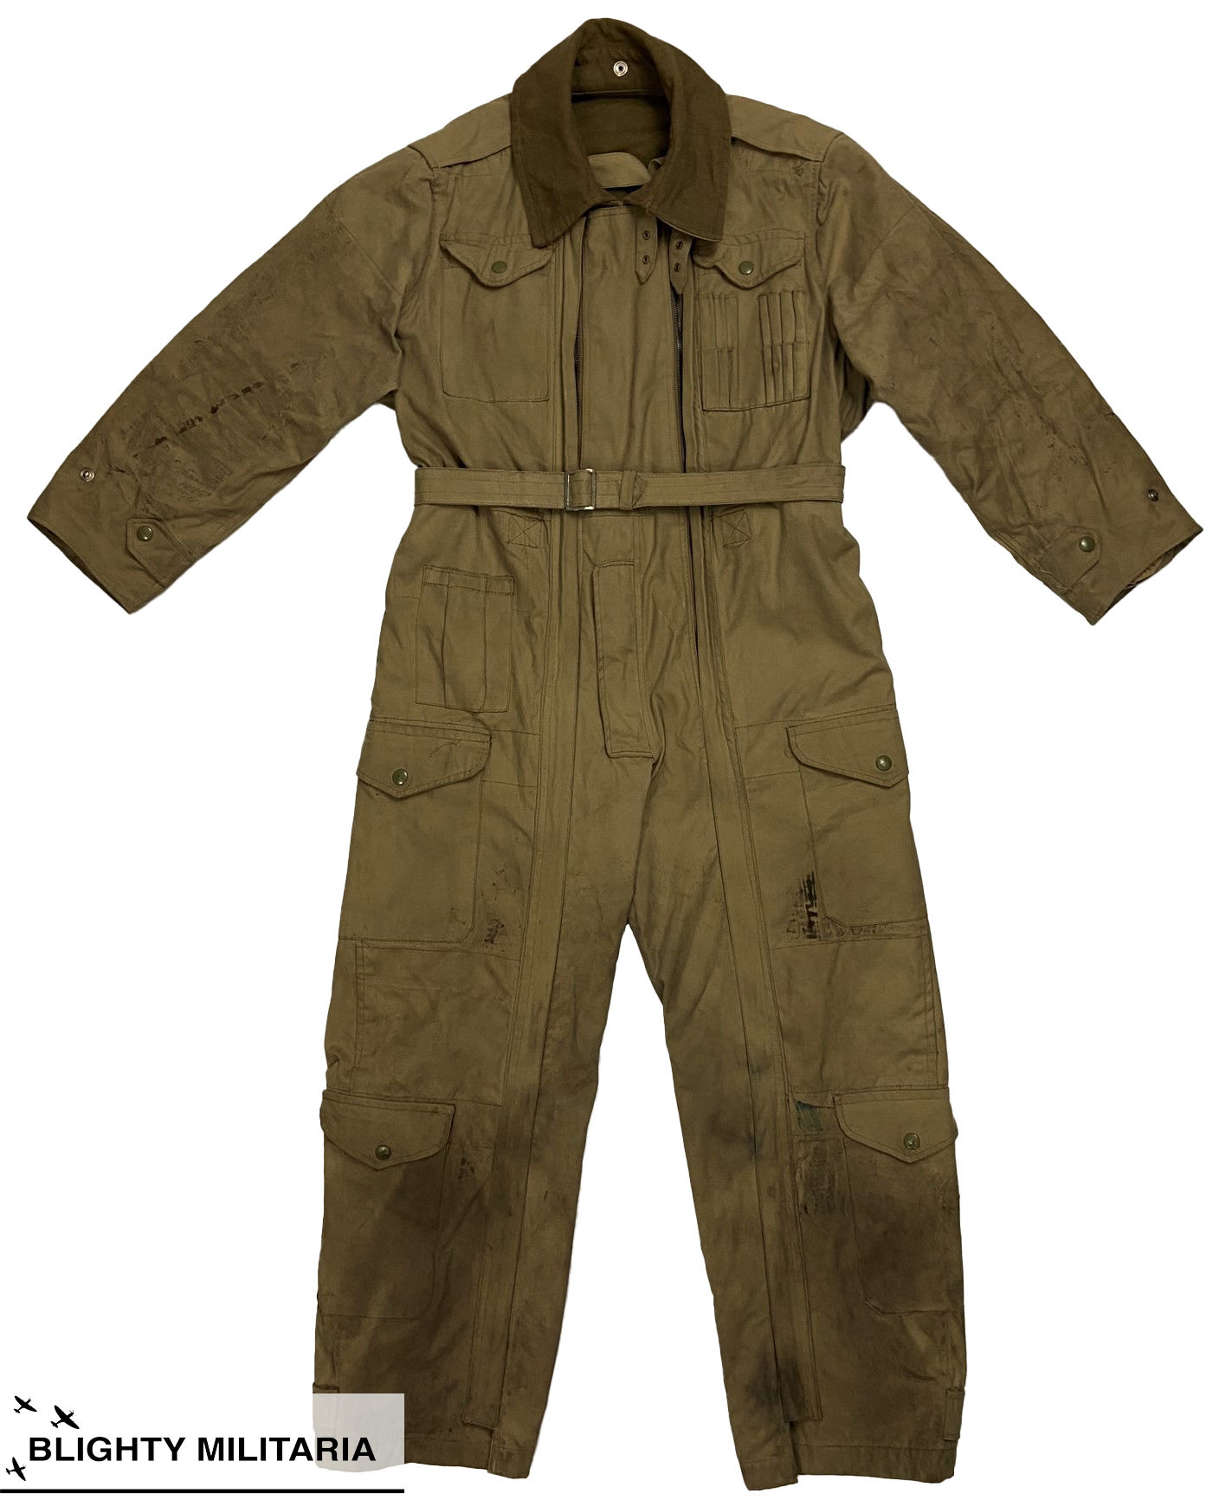 Original 1954 Dated British Army Winter Tank Suit - Size 4